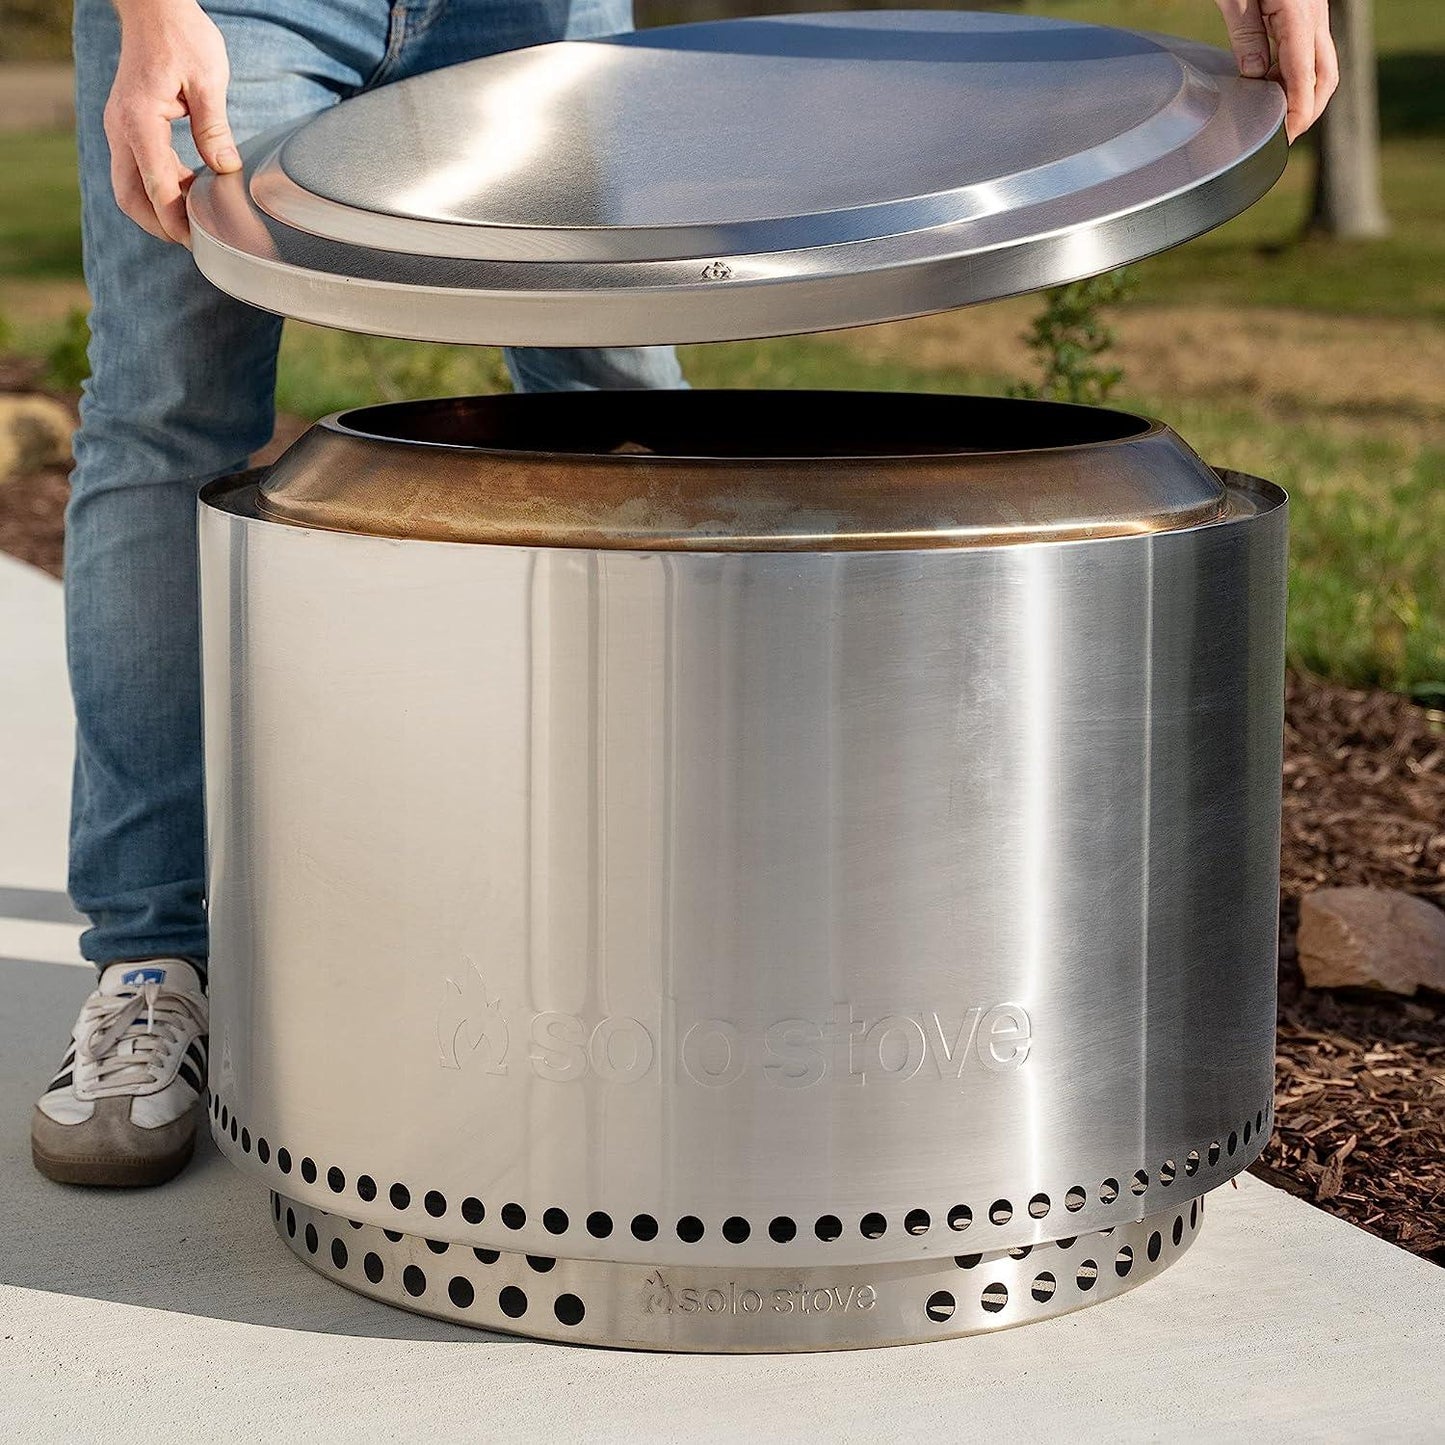 Solo Stove Lid made of 304 Stainless Steel for Outdoor Fire Pits